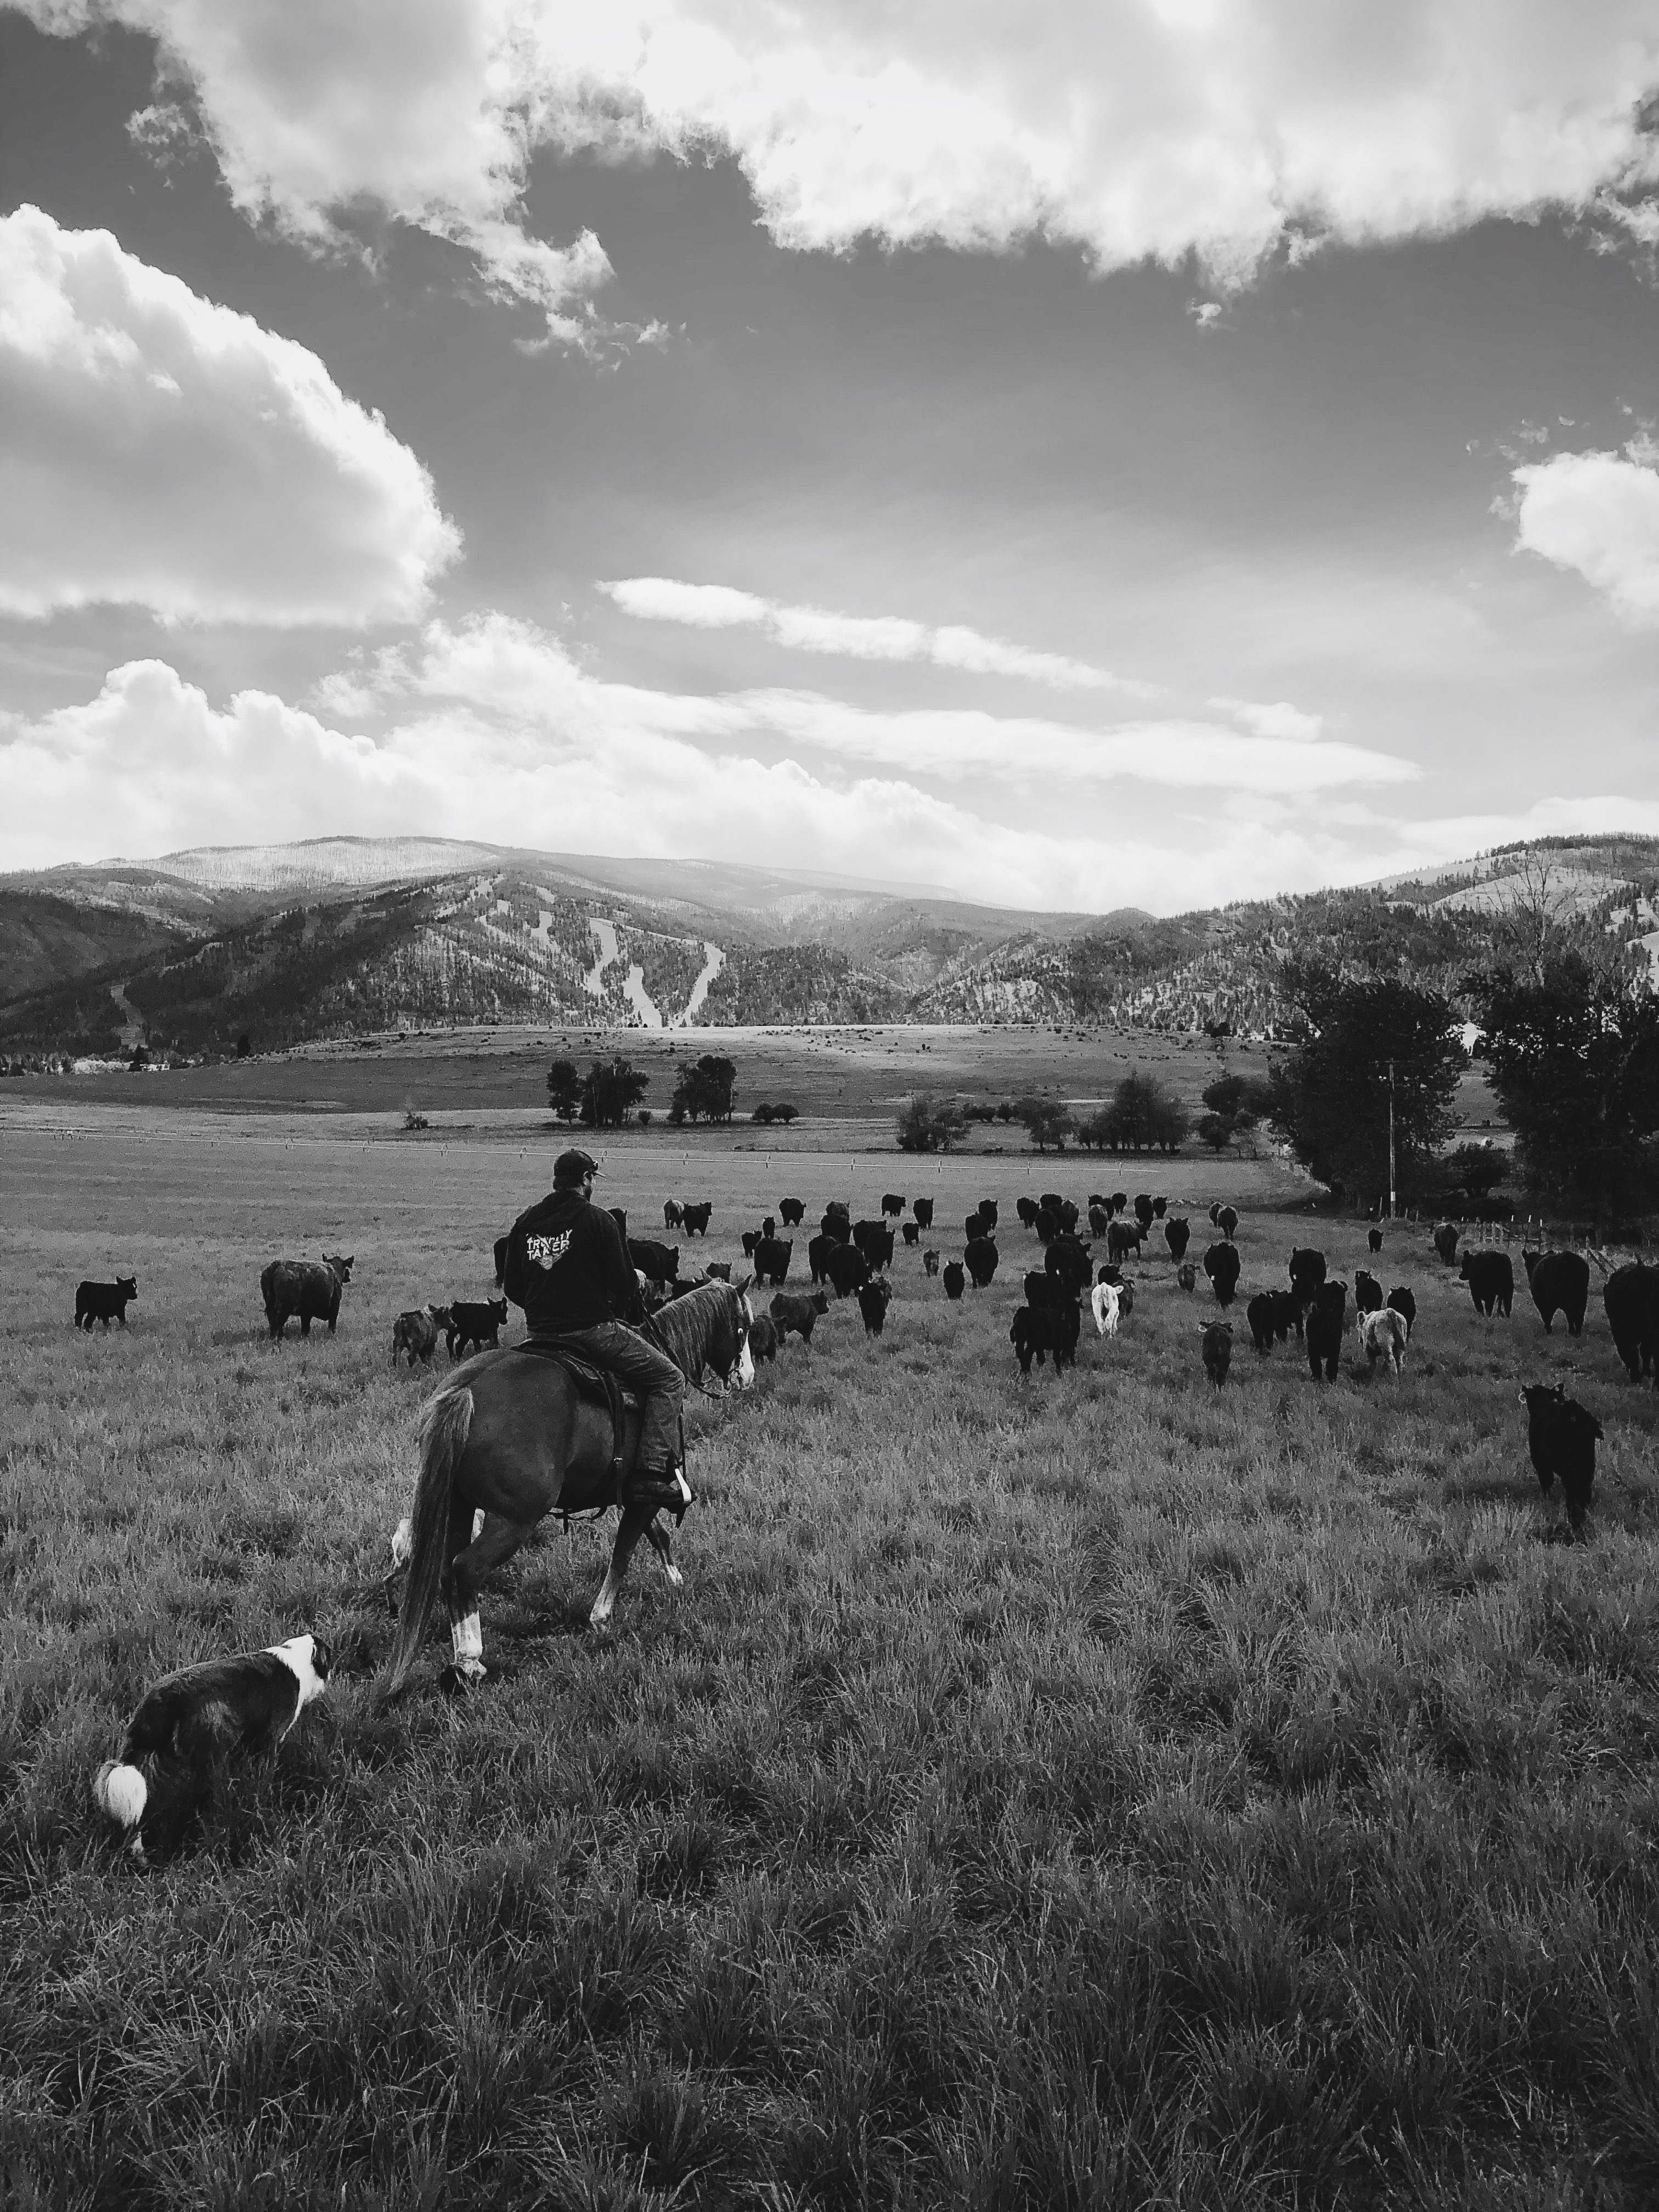 THE HUMBLINGS OF MOVING CATTLE